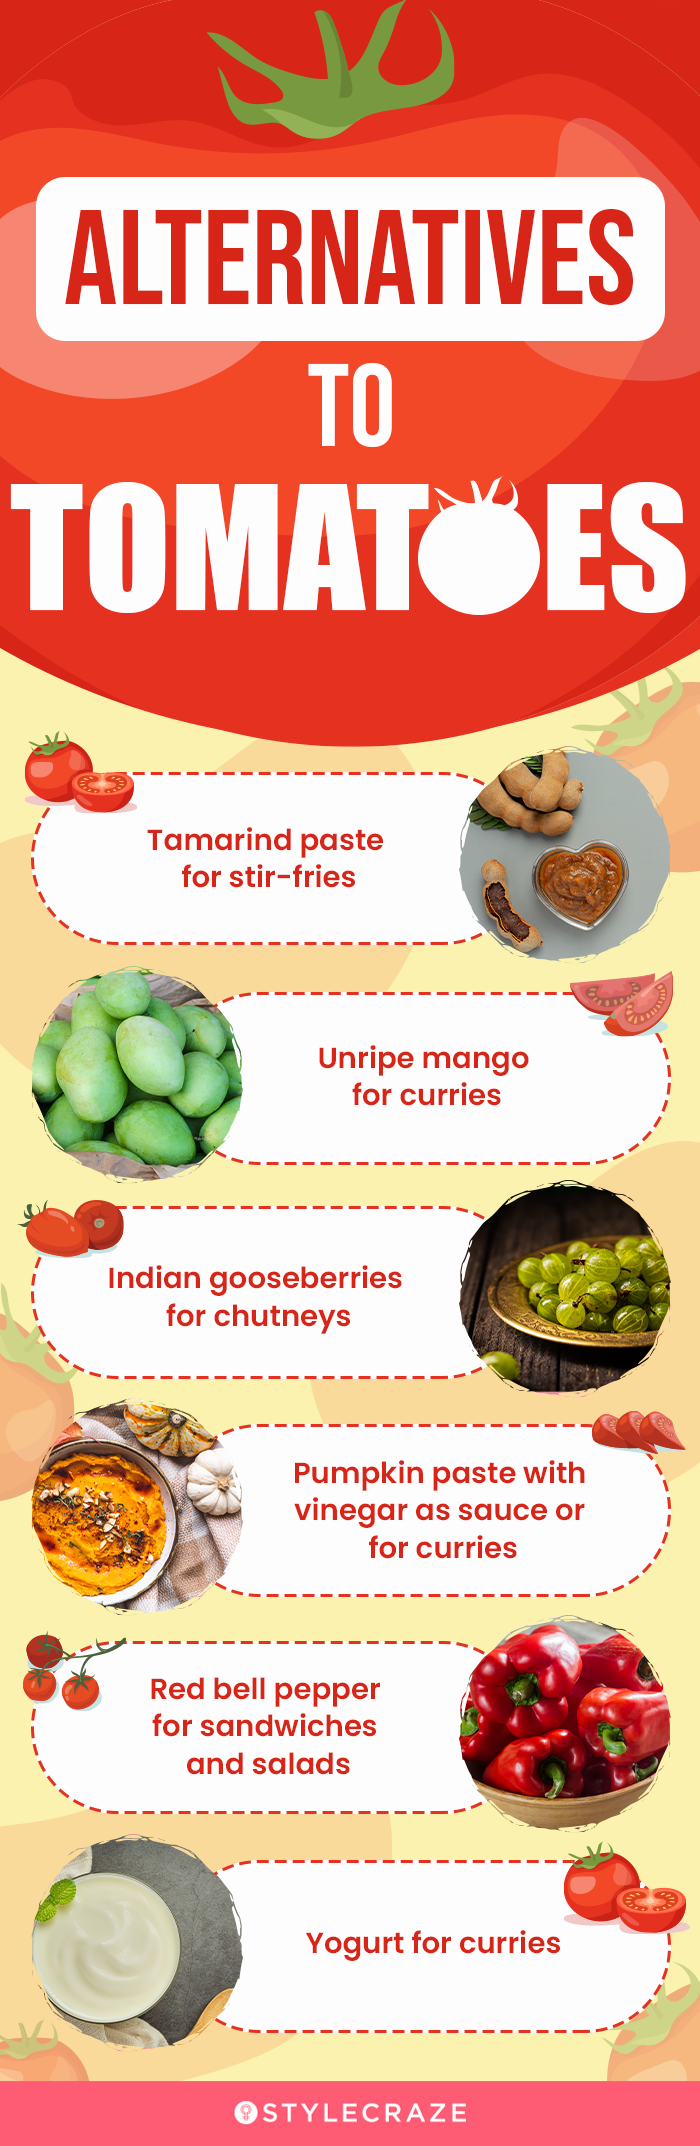 alternatives to tomatoes[infographic]